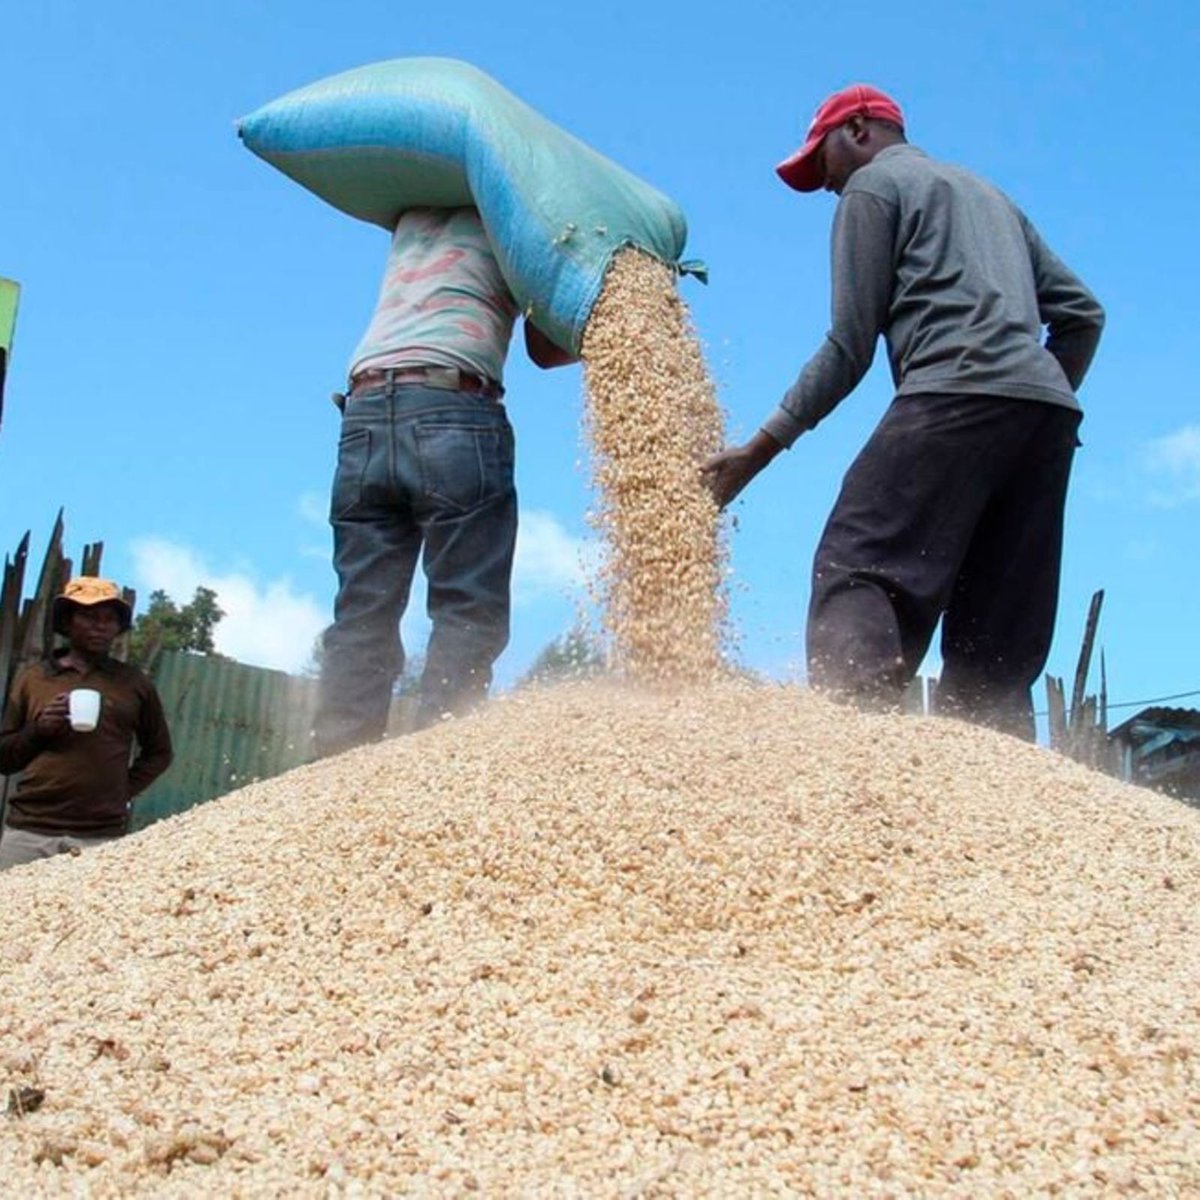 According to state security intelligence report leaked to COZWVA notifying JOC & President ED, by August Zim wil be facing a serious crisis of meal meal due to draught caused by cyclone El Nino. Apparently a bucket of maize is not going for US$10 compared to U$3 same time last yr